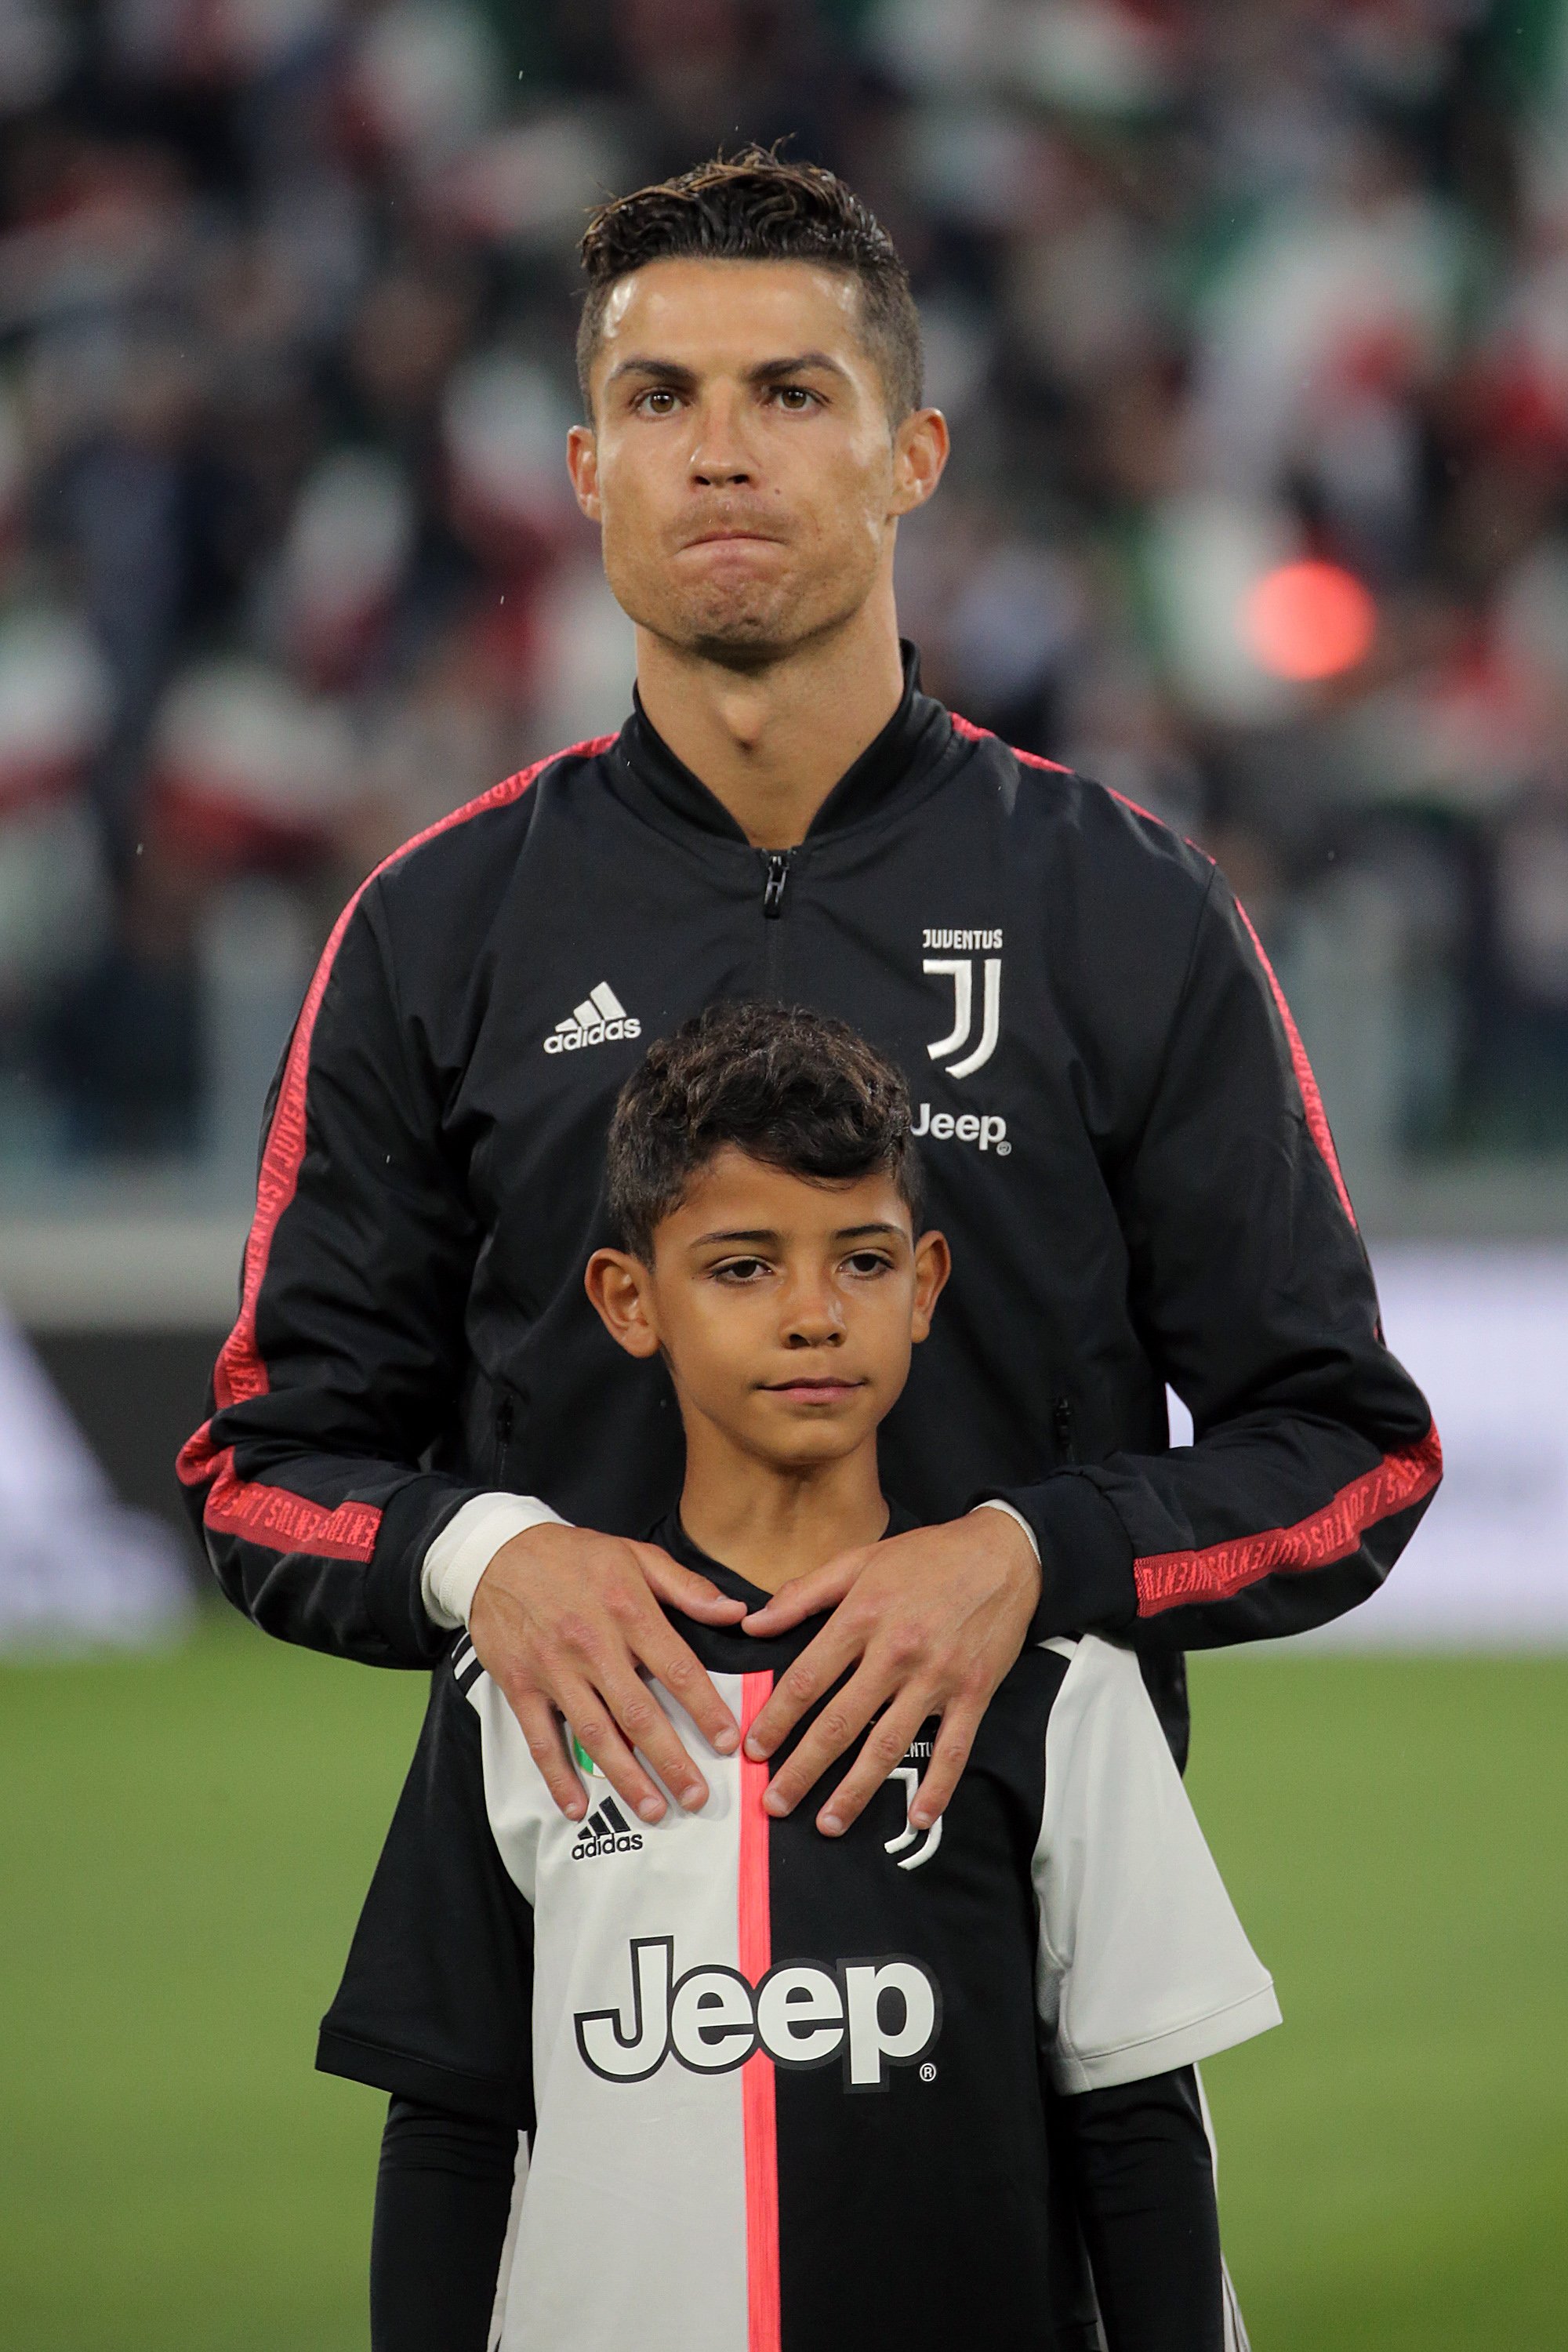 Cristiano Ronaldo and Cristiano Ronaldo Jr. before the serie A match between Juventus FC and Atalanta BC on May 19, 2019 | Source: Getty Images